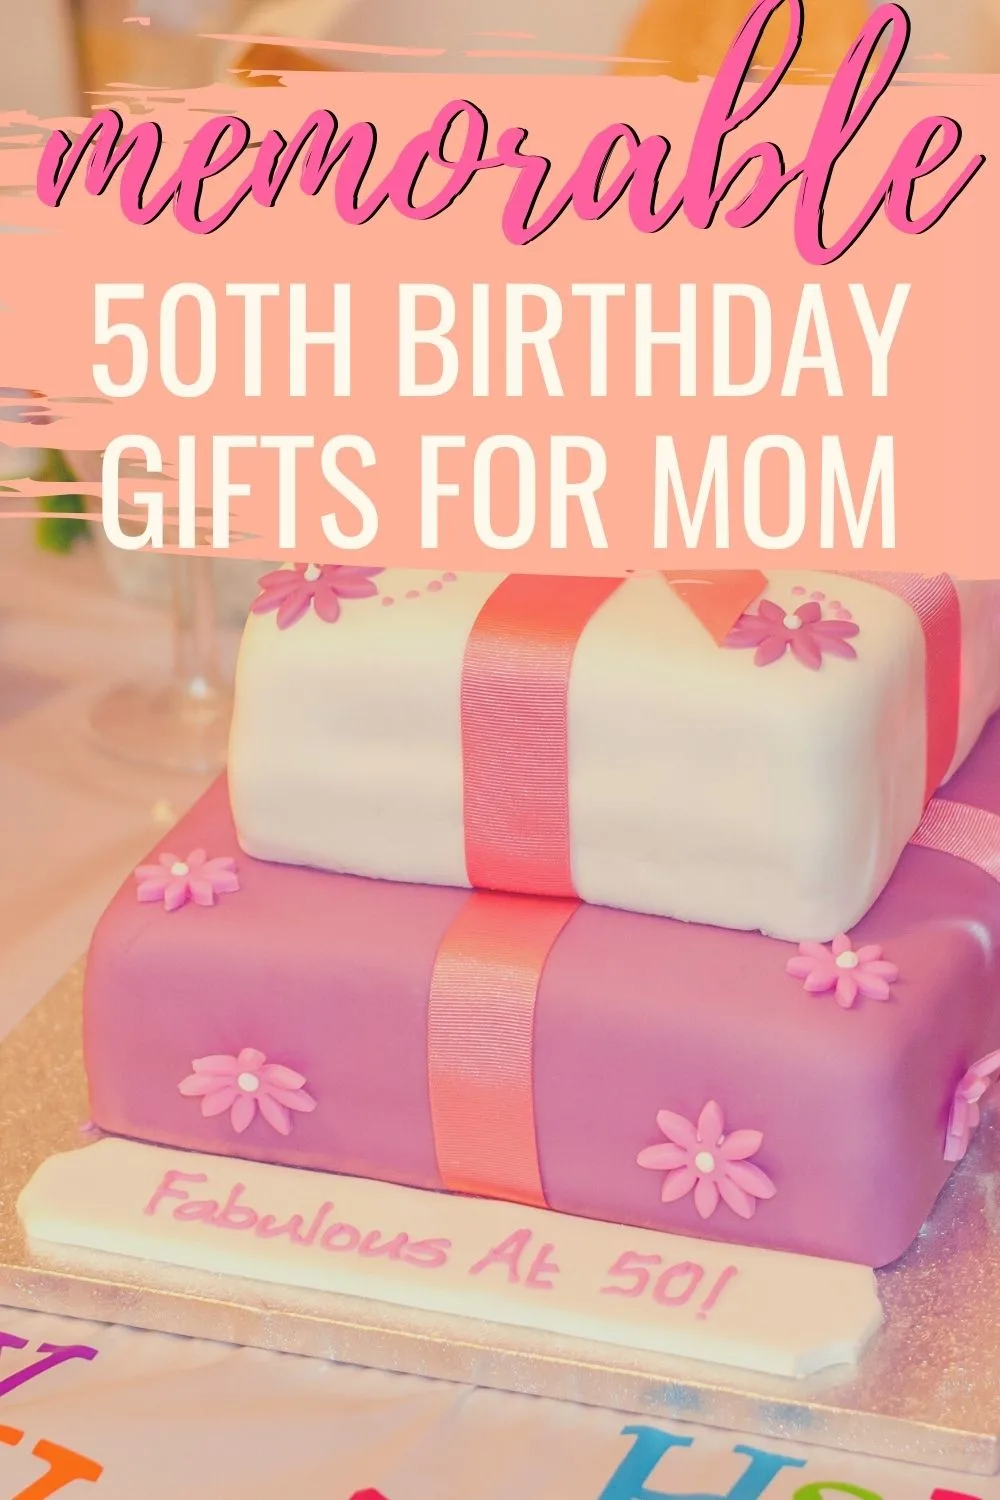 Memorable 50th birthday gifts for mom